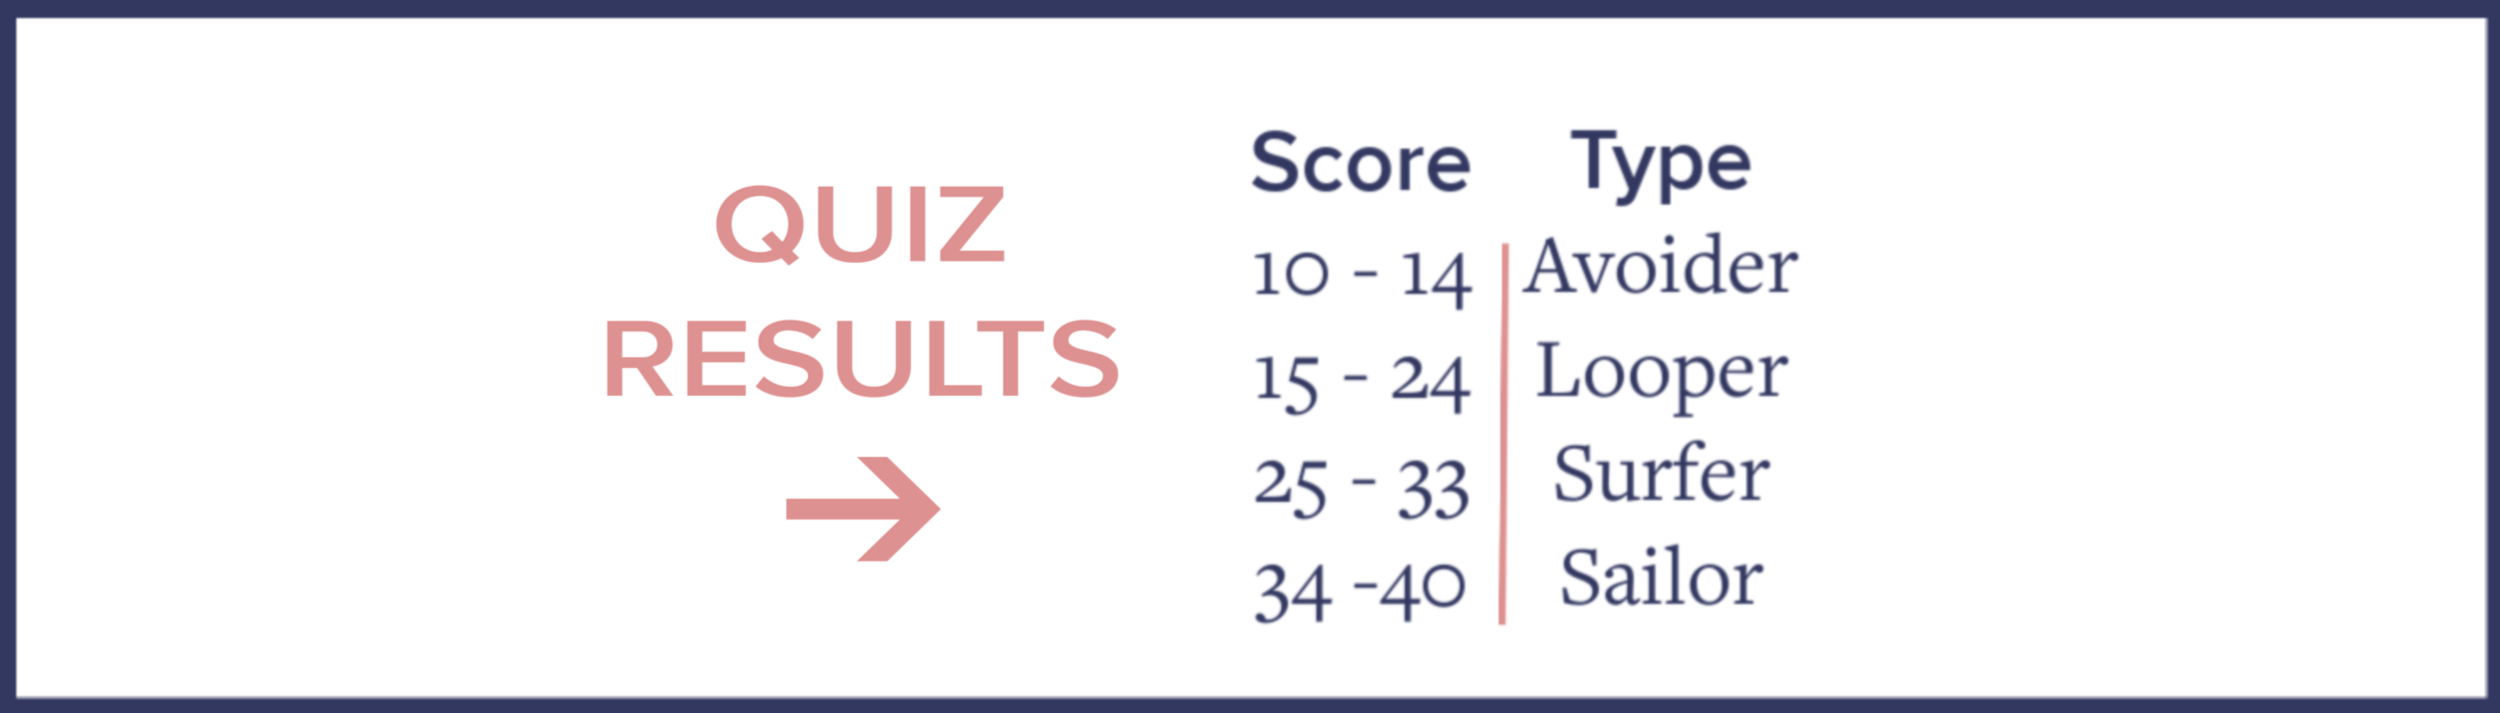 quiz results banner.png